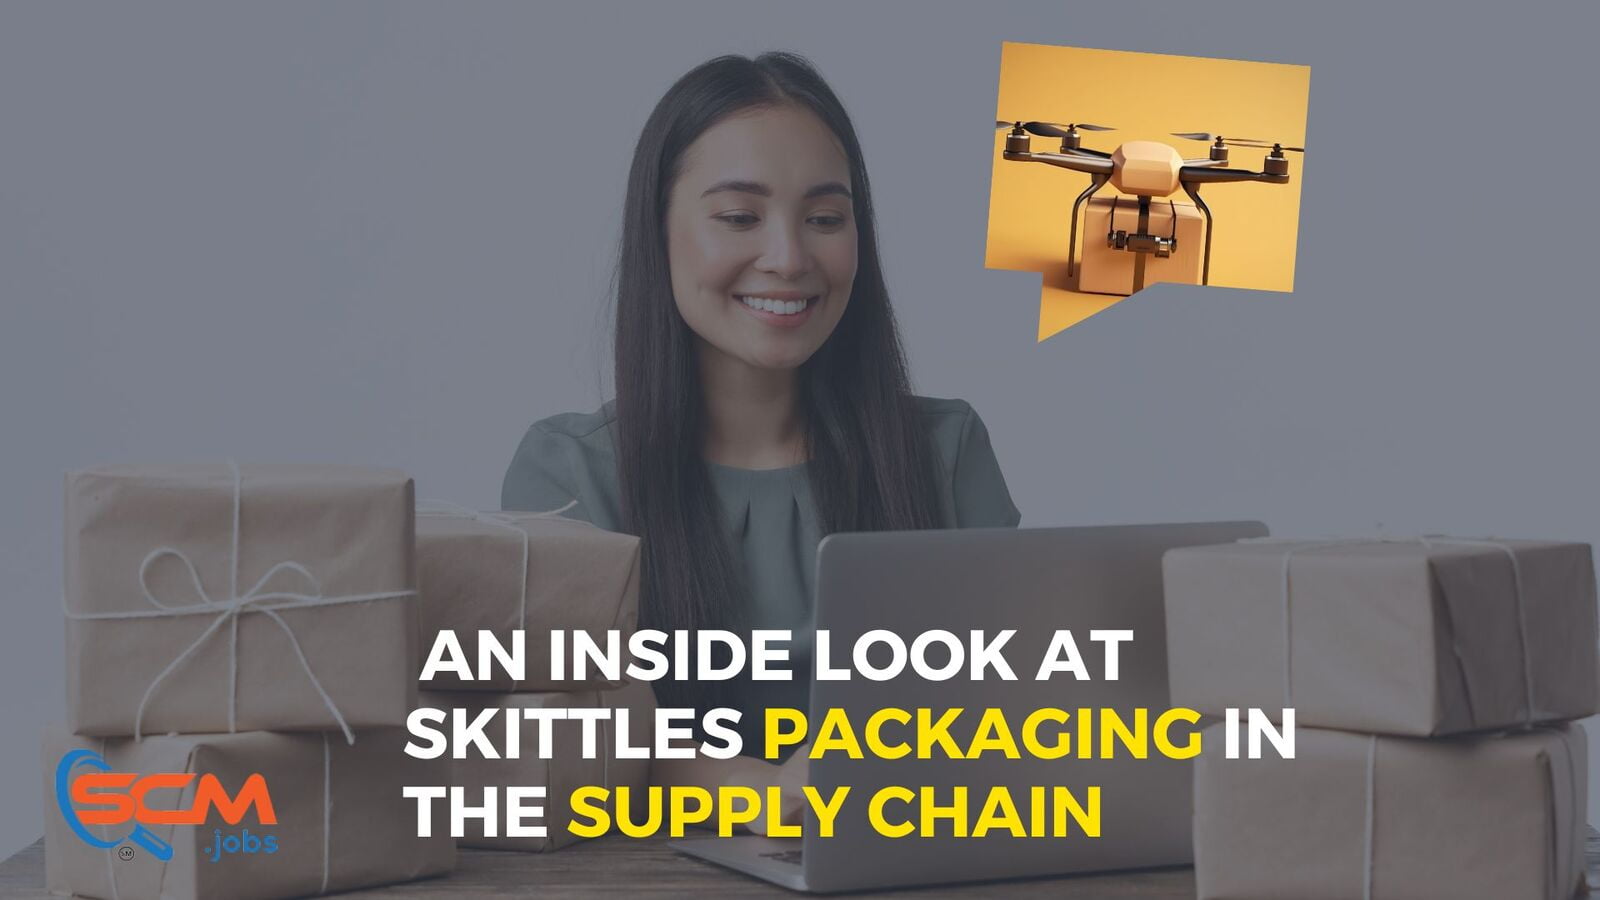 Unwrapping the Rainbow: An Inside Look at Skittles Packaging in the Supply Chain